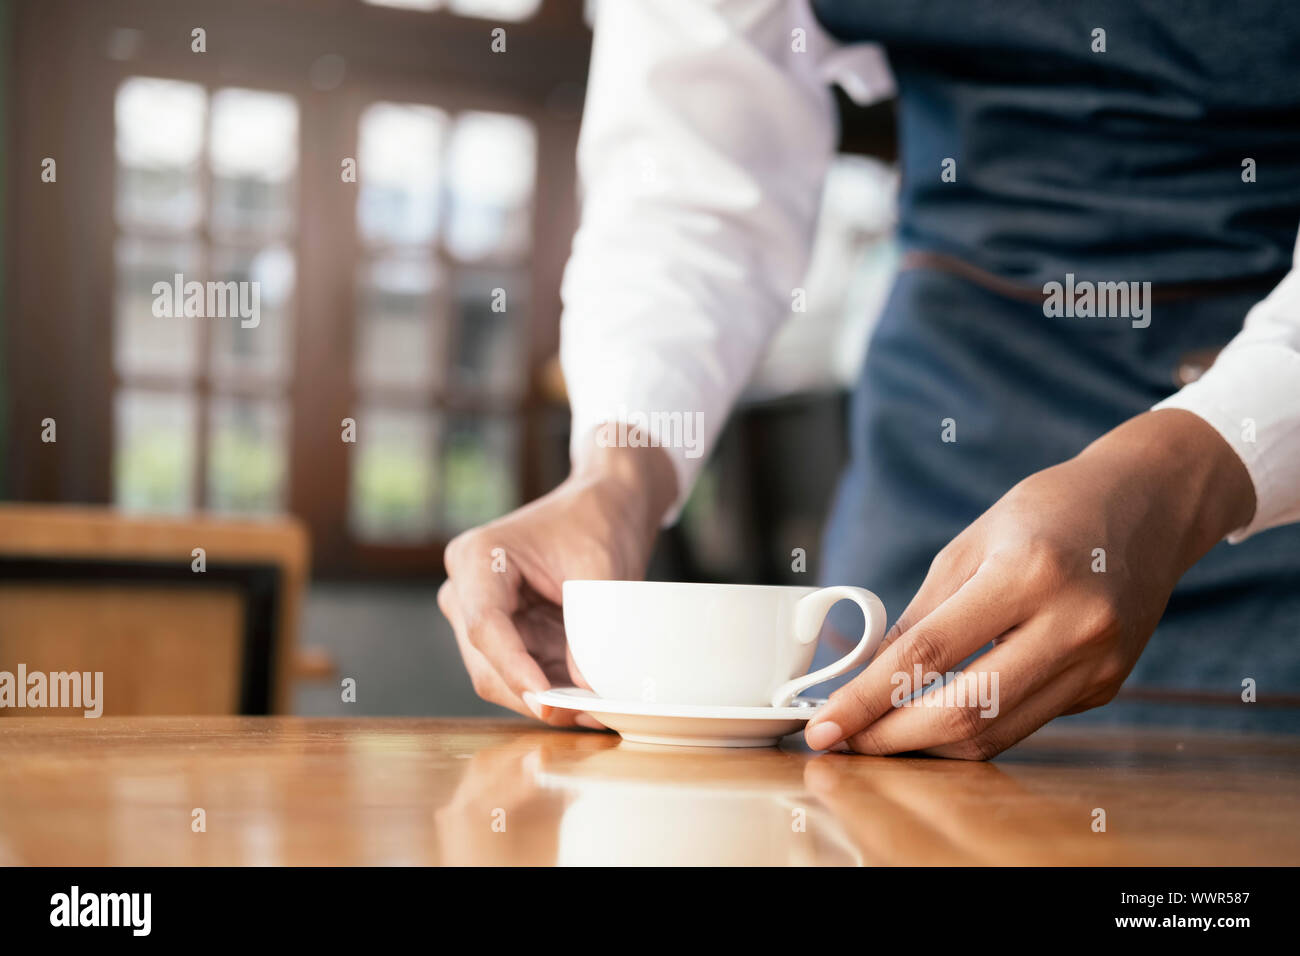 Young owner of coffee cafe service customer. Small business and owner business concept. Stock Photo